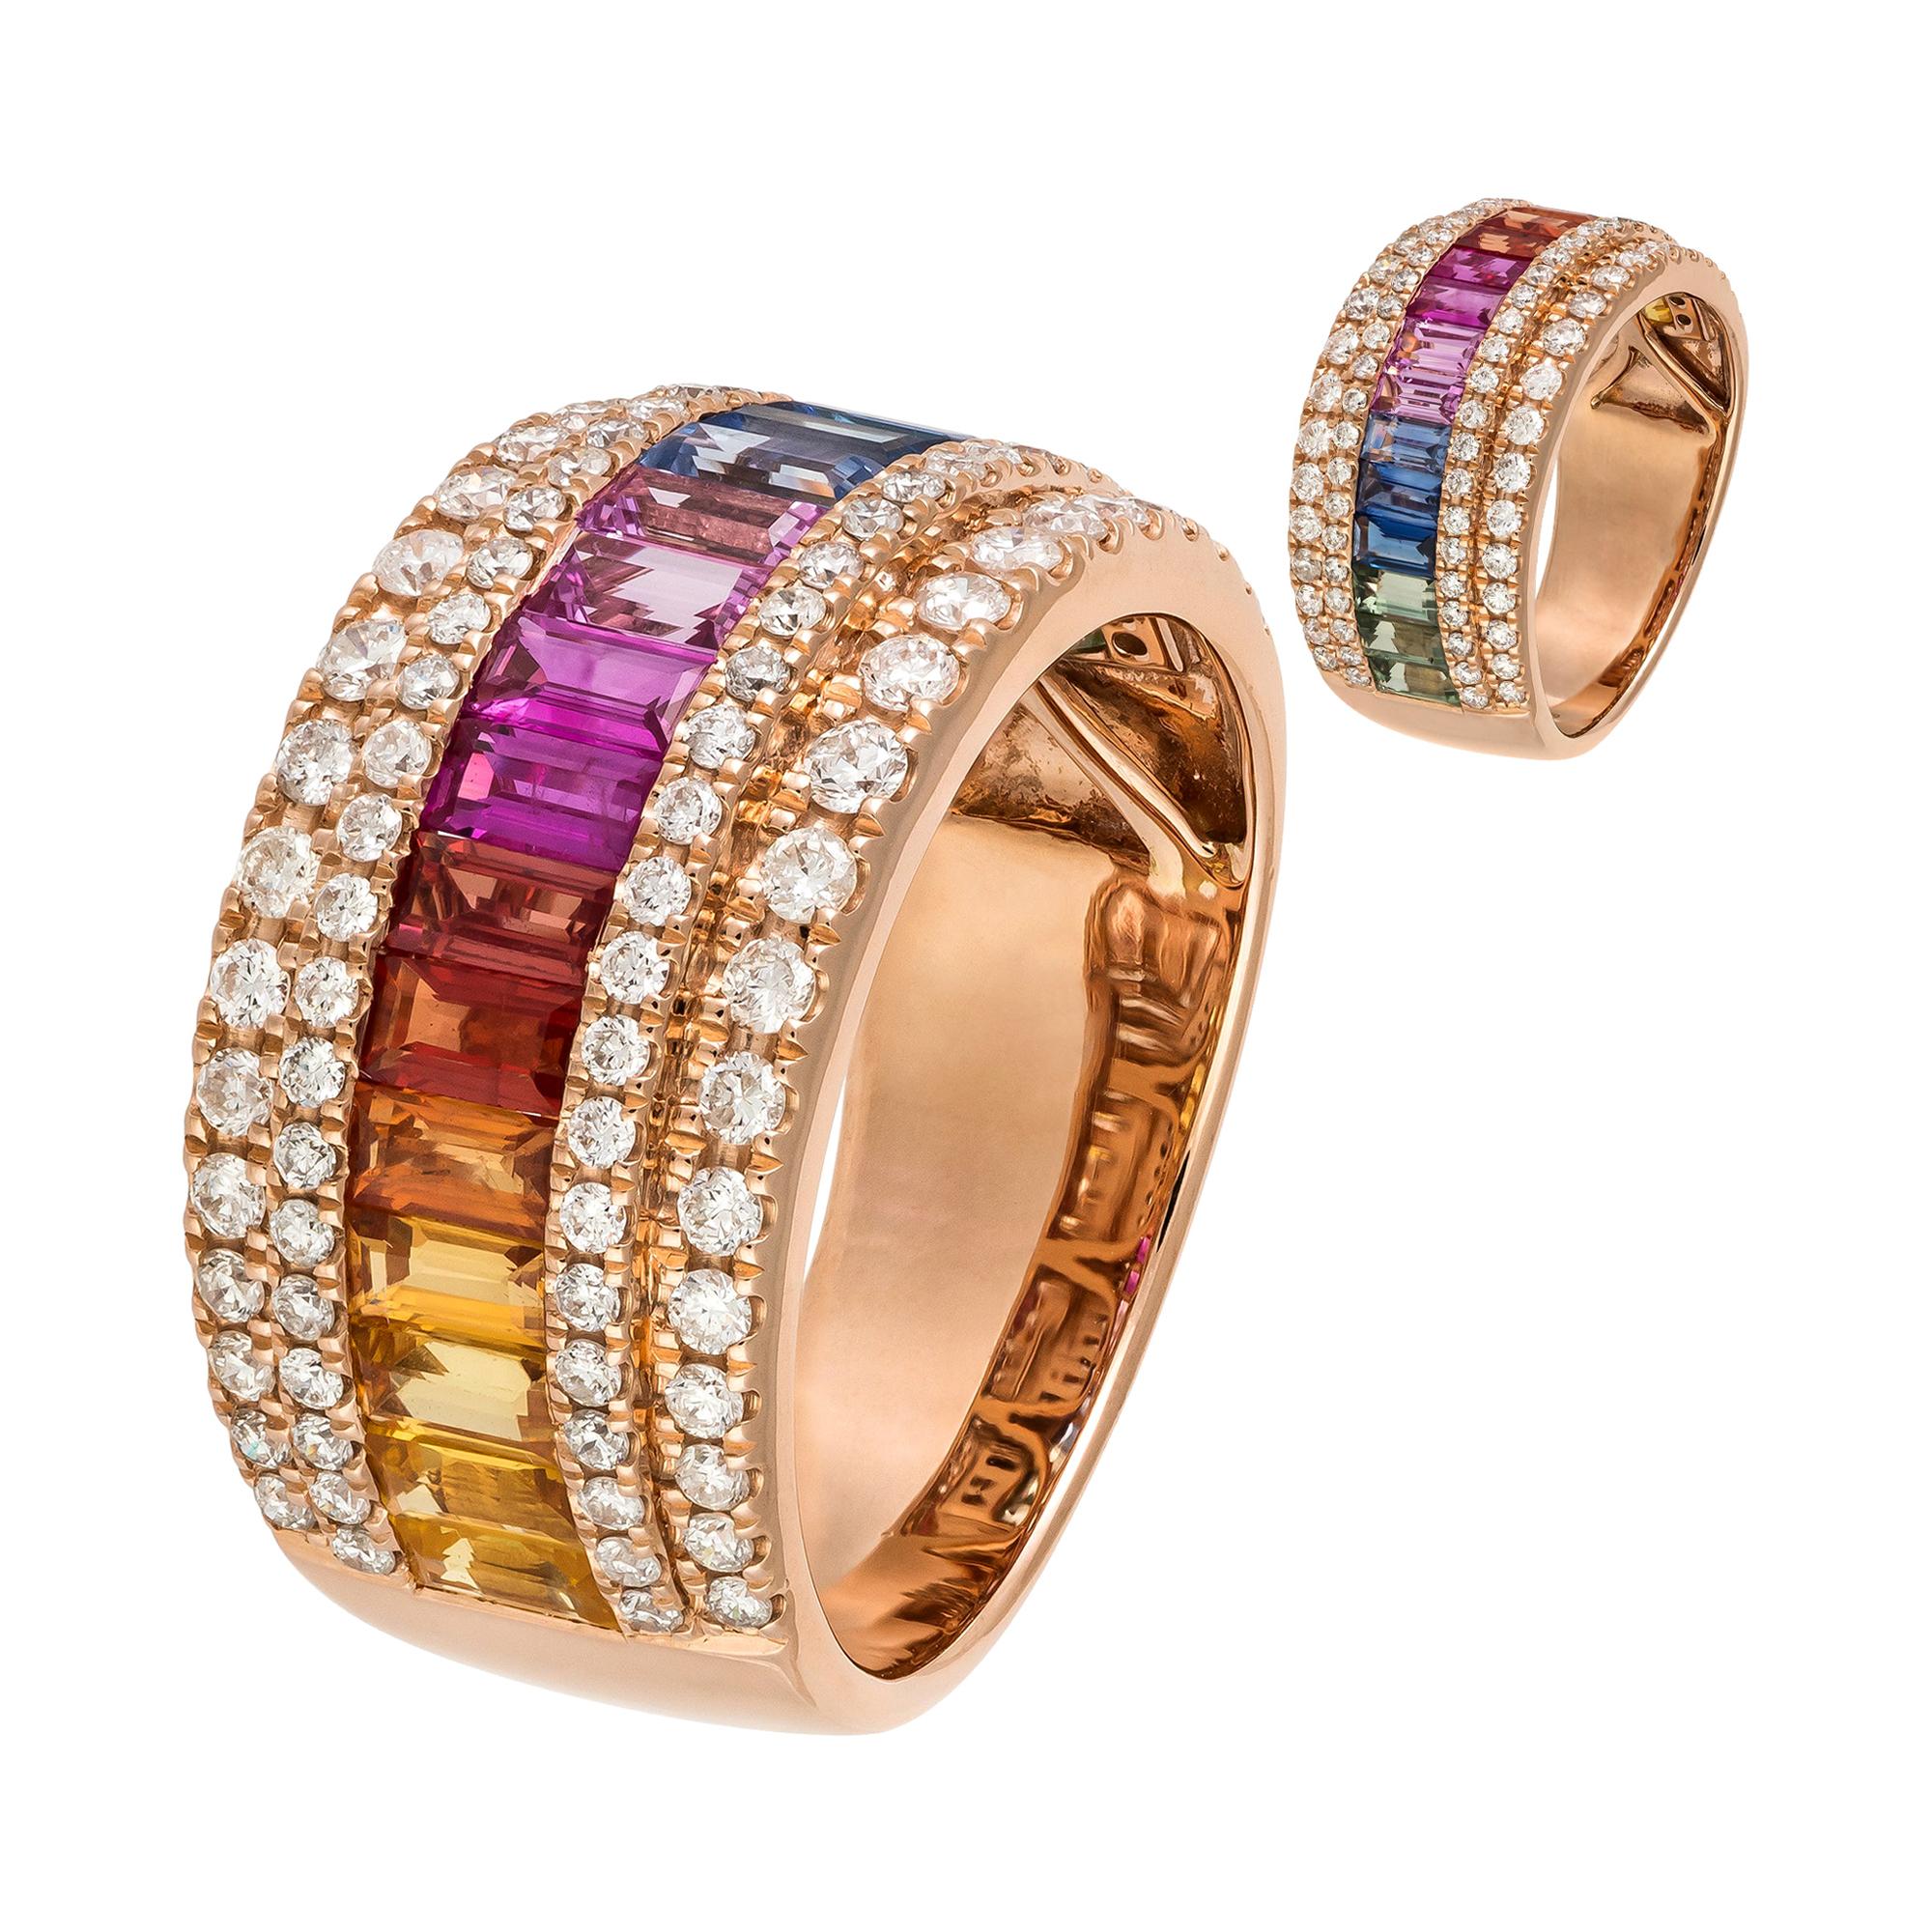 Multisapphire Diamond Rose Colourful Band Ring for Her 18 K Gold